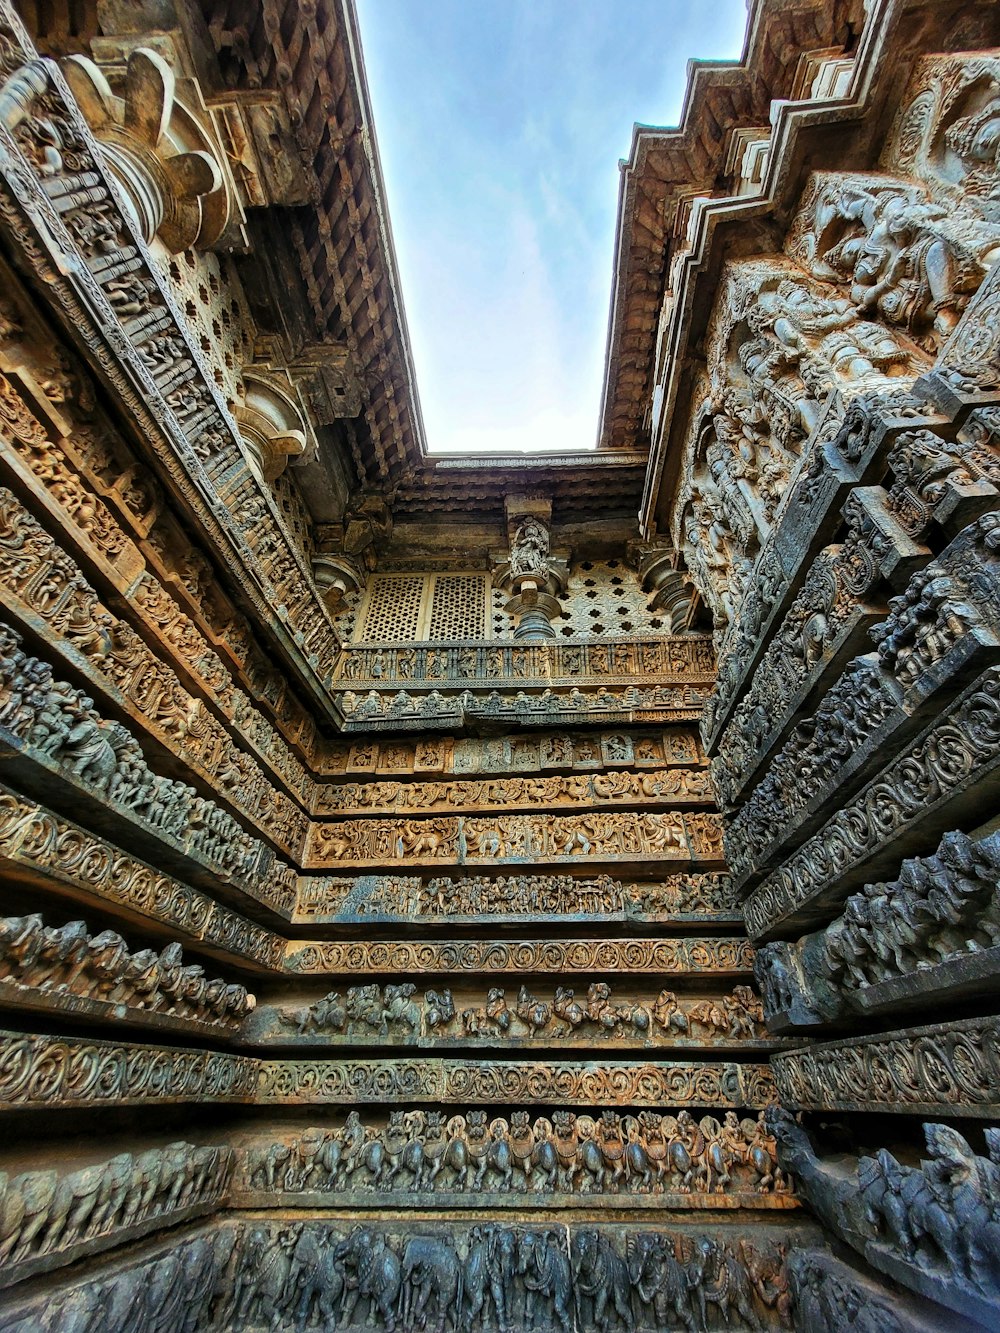 an intricately carved ceiling in a building